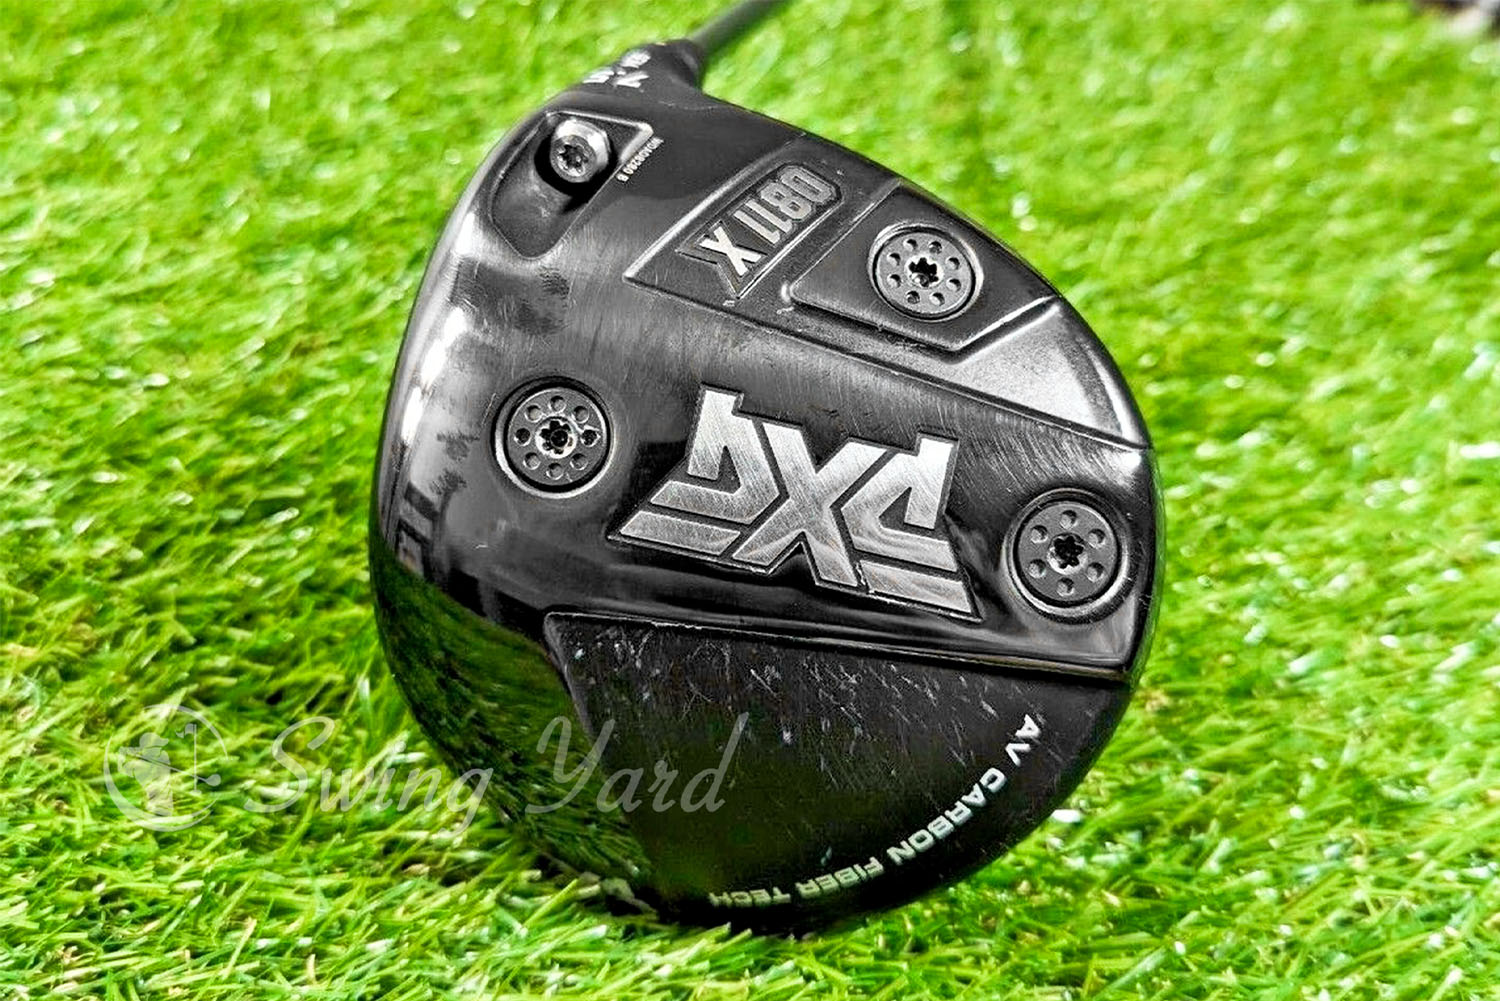 Alternate view of the bottom of the PXG Gen4 driver head